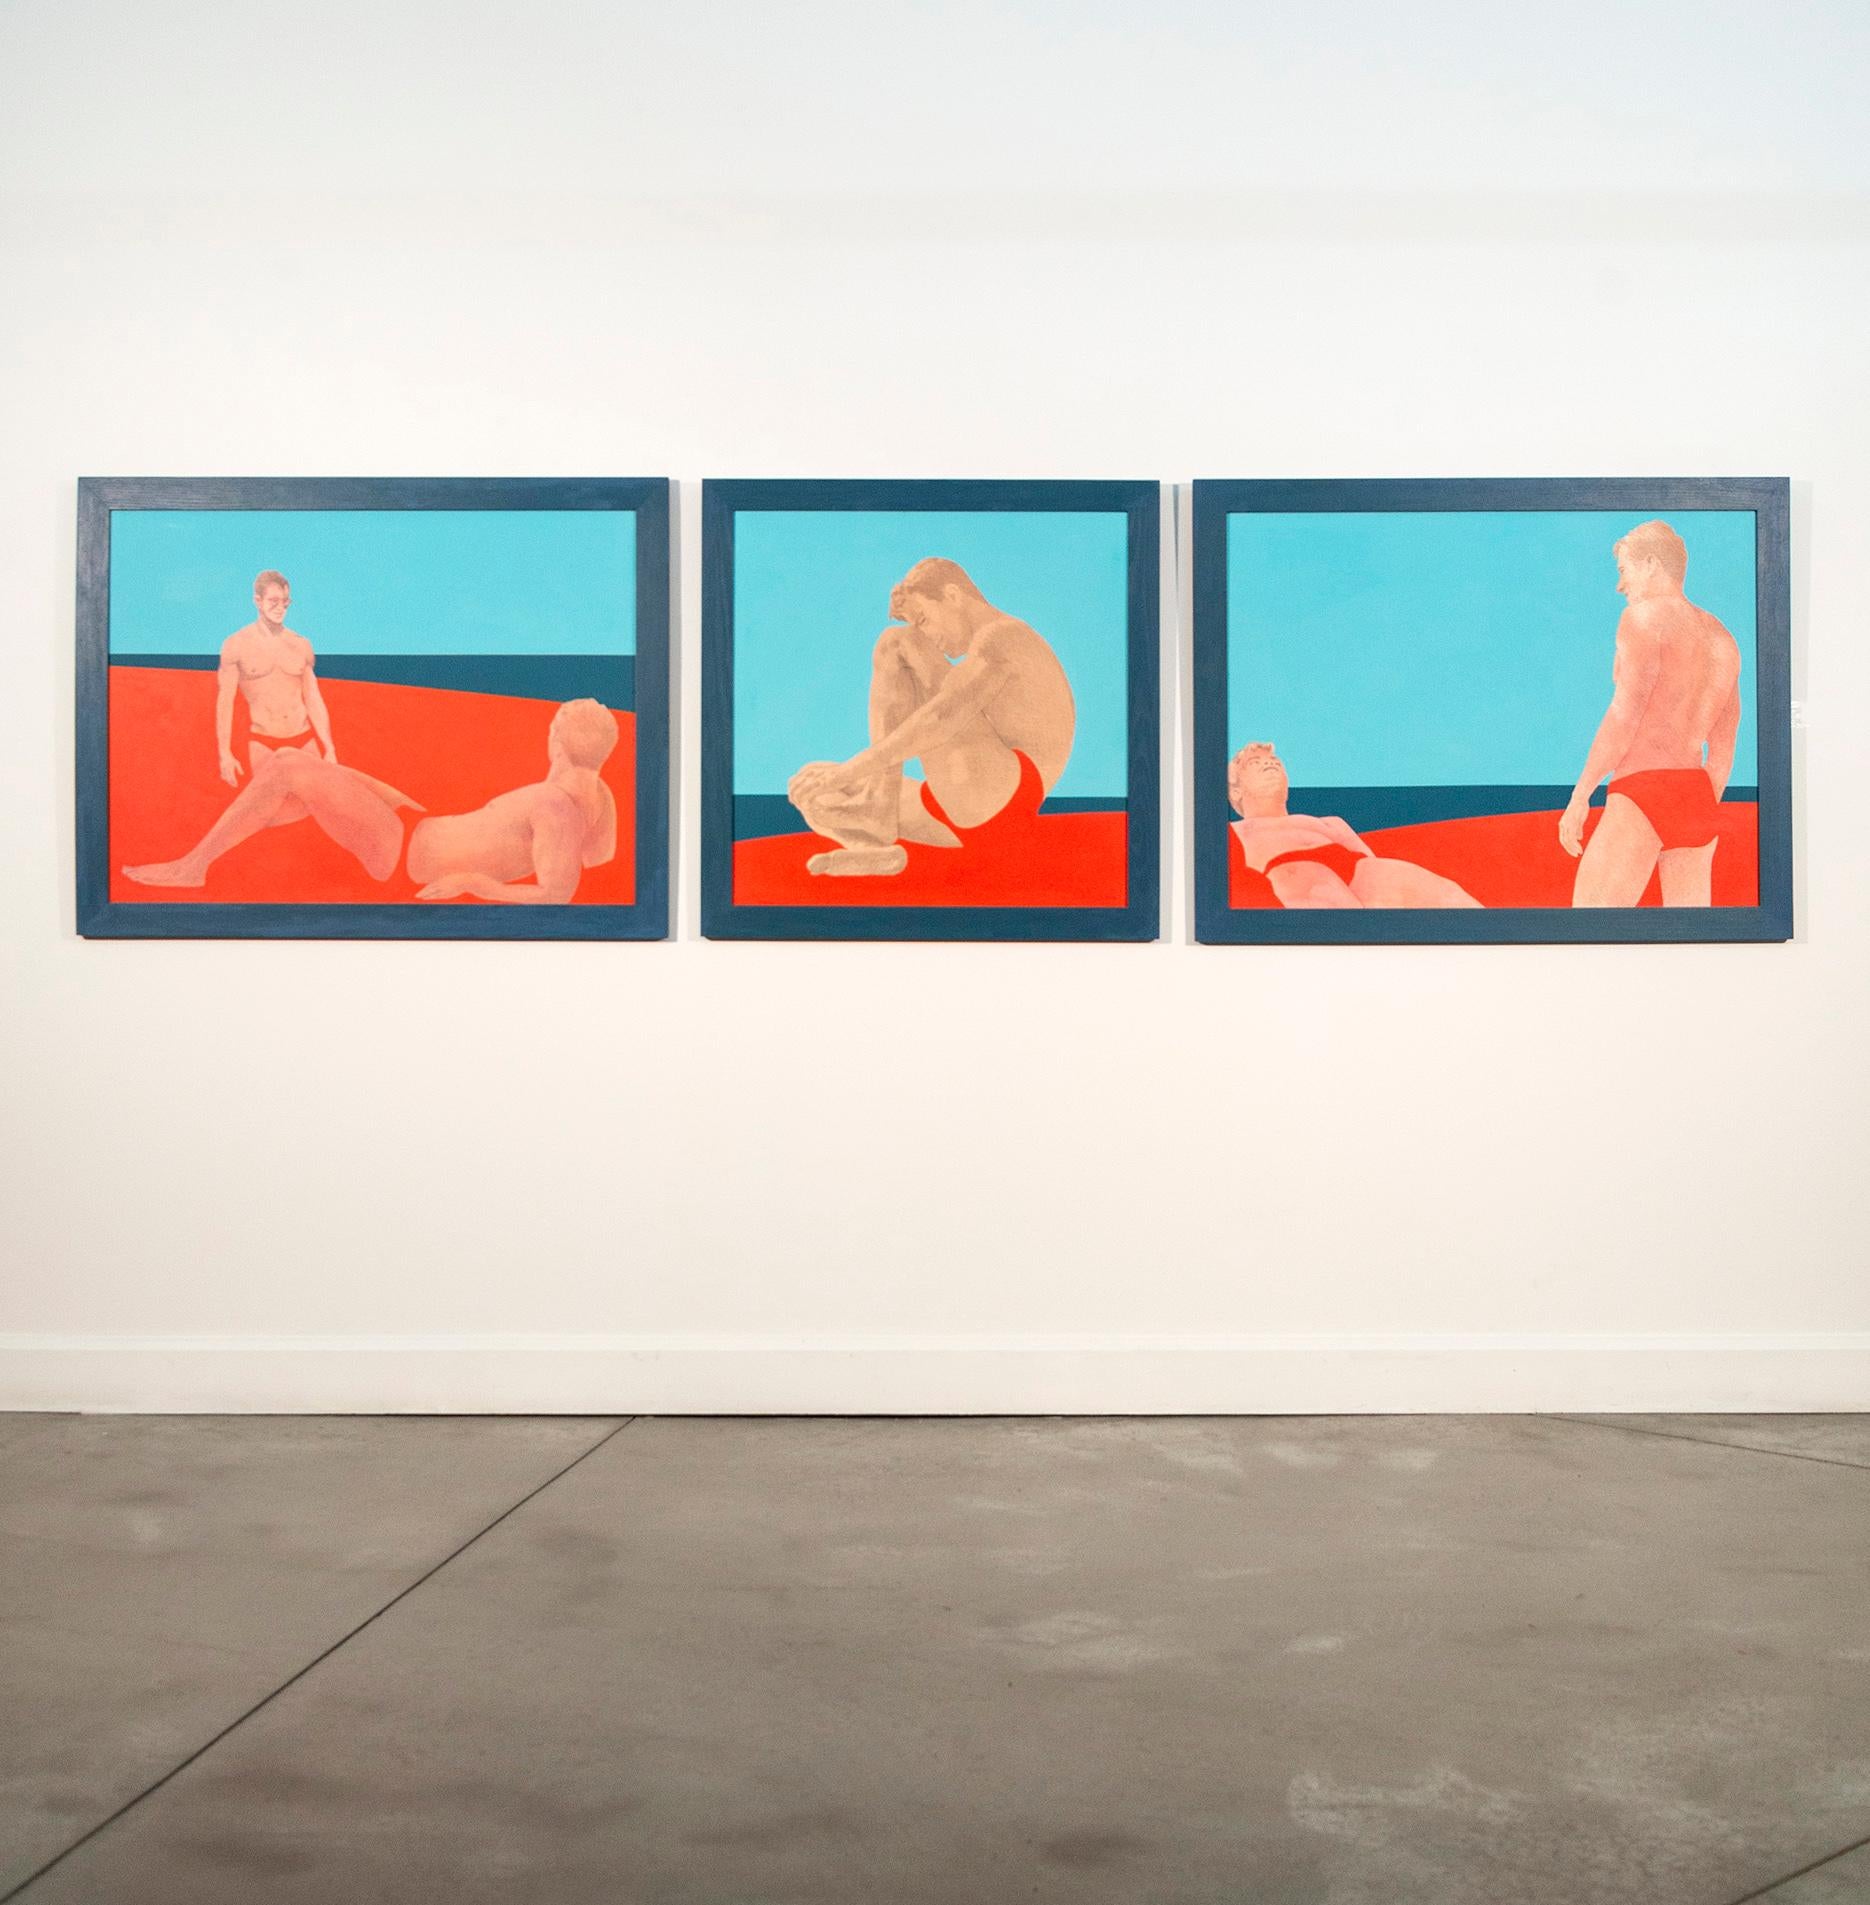 Sandbar Trilogy is a brilliantly colorful pop art painting, an ode to the popular gay beach scene in Miami, Florida. Three panels of male figures  are seen lounging, sitting and standing. The painting style—graphic, semi-abstract and hard-edged is